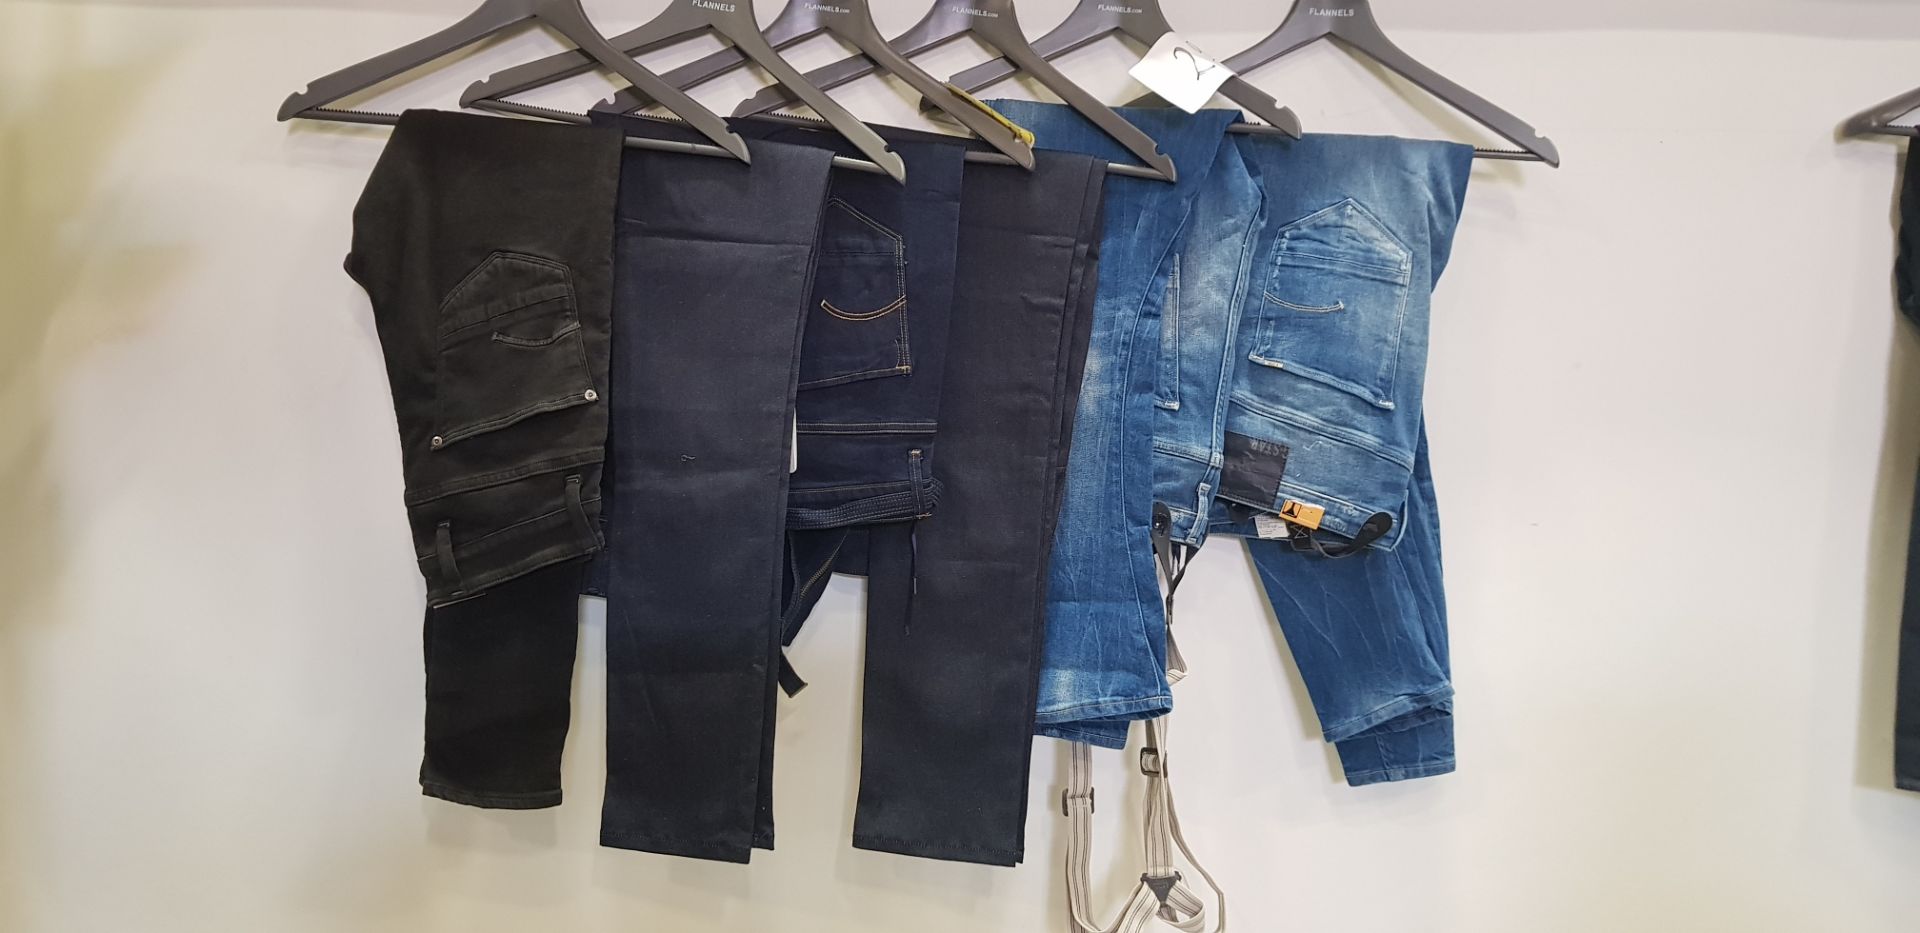 6 X BRAND NEW G-STAR RAW JEANS IN VARIOUS COLOURS (SIZE 29)